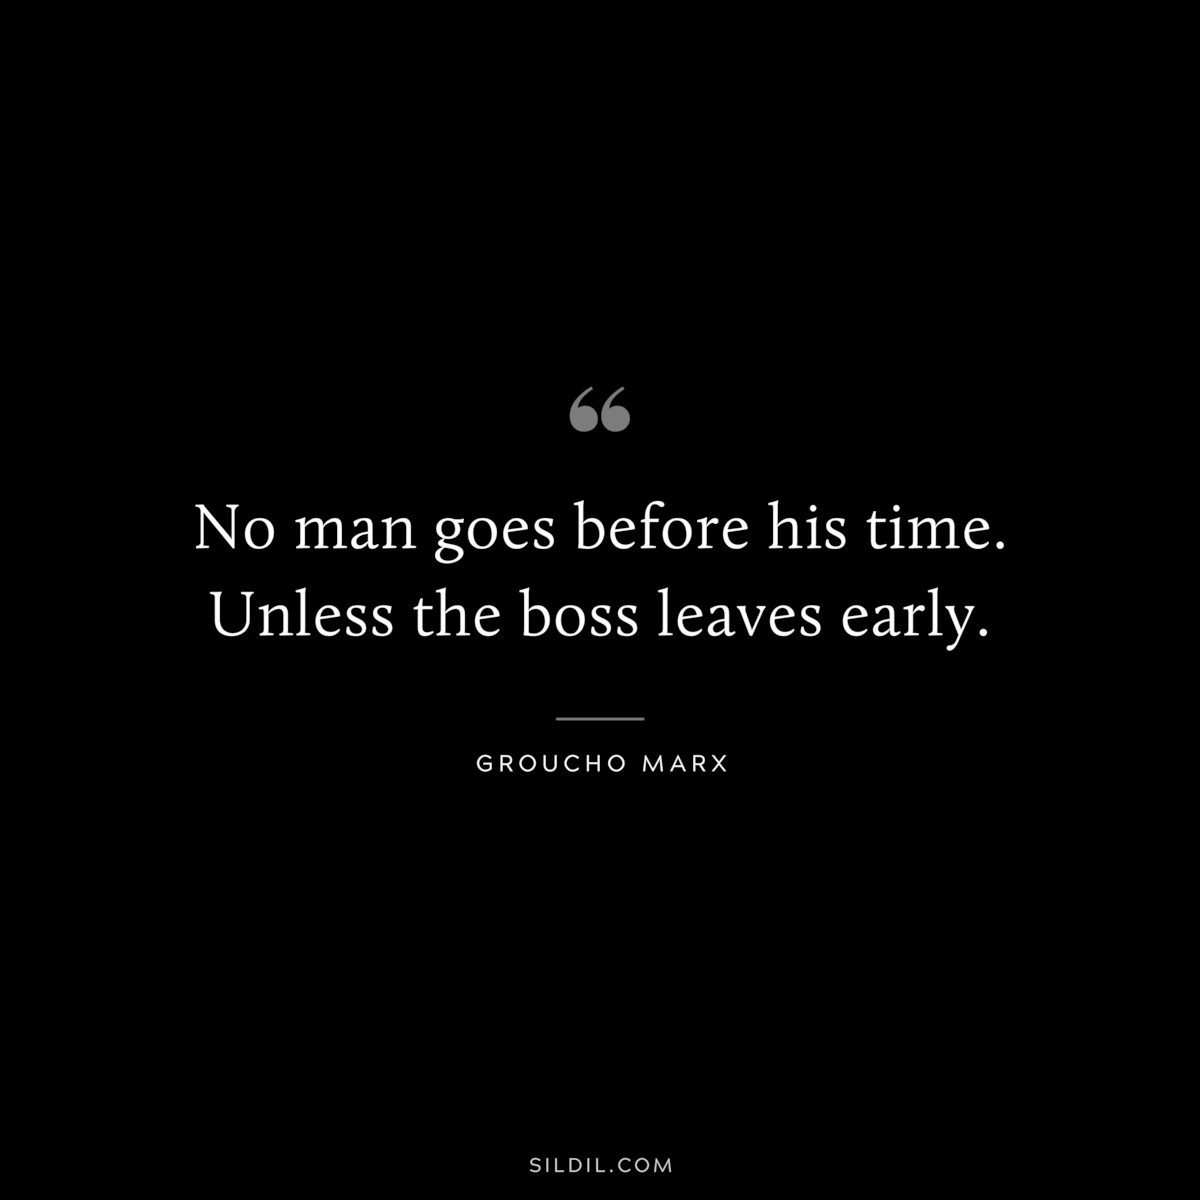 No man goes before his time. Unless the boss leaves early. ― Groucho Marx